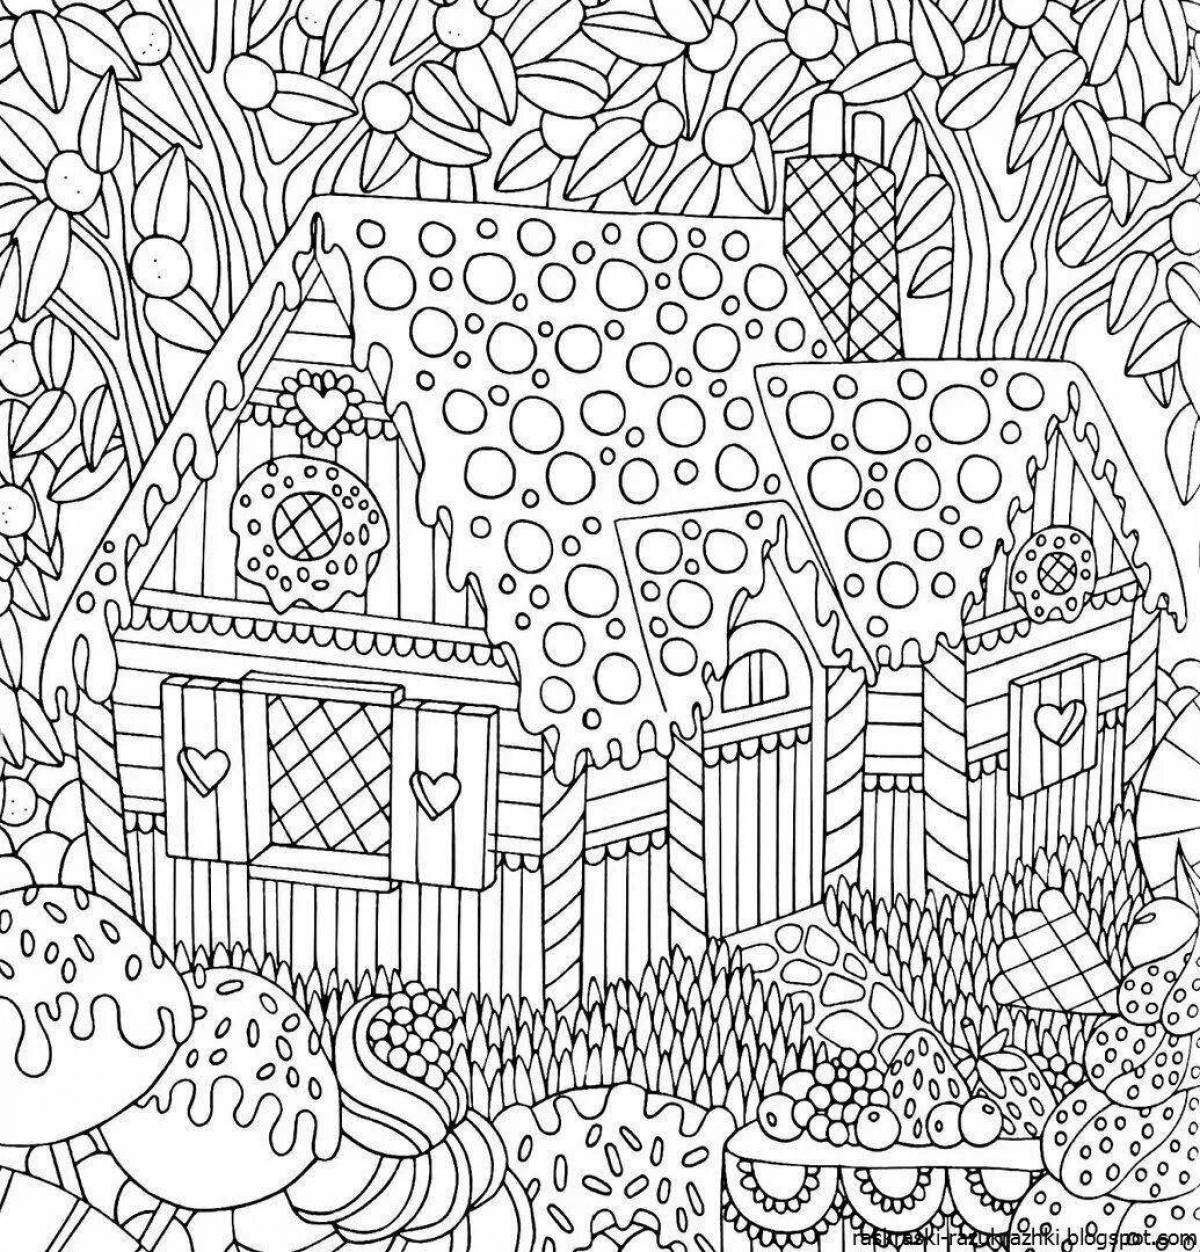 Intriguing coloring book for adults, large